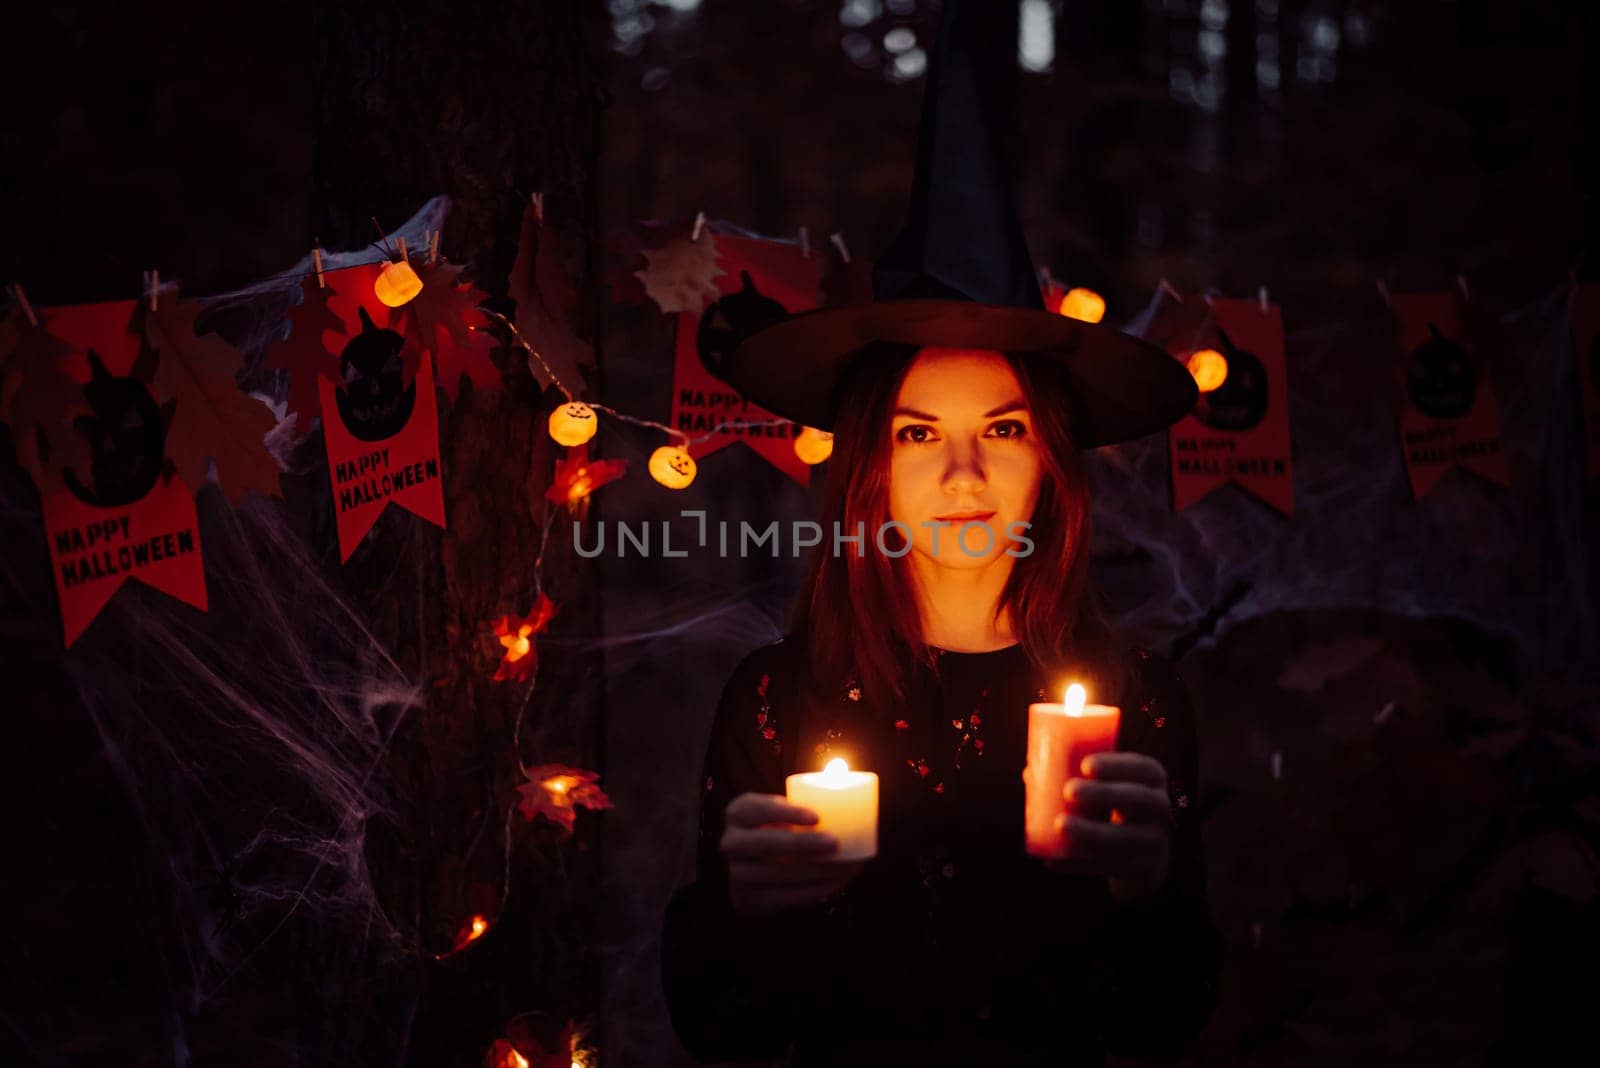 Portrait of a girl with bright candles in forest at night